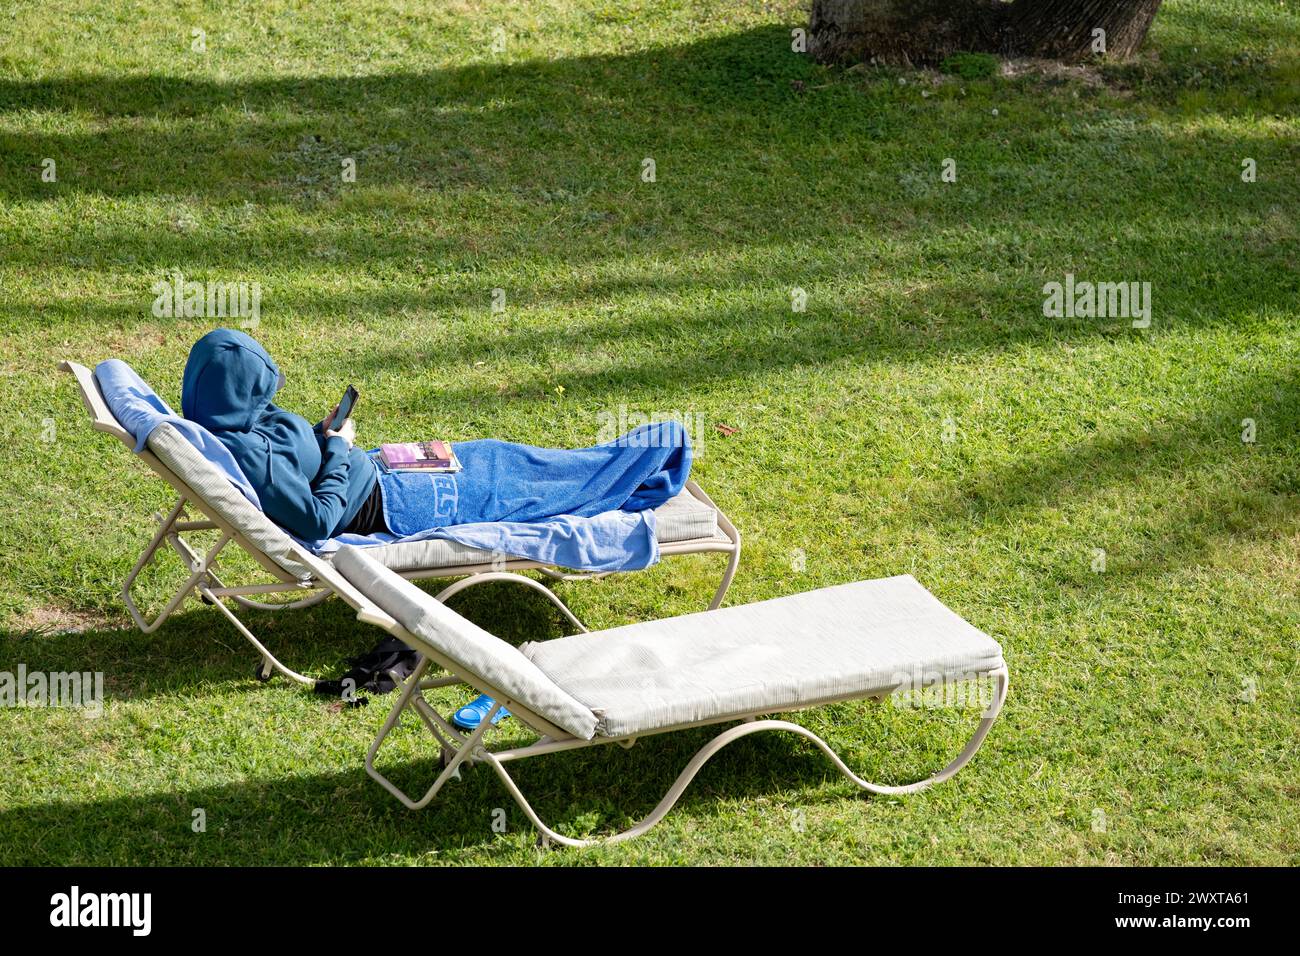 A person lying out on a sun lounger, in sunny weather. The sunbather has wrapped a towel around their legs and is wearing a hooded top to keep warm Stock Photo